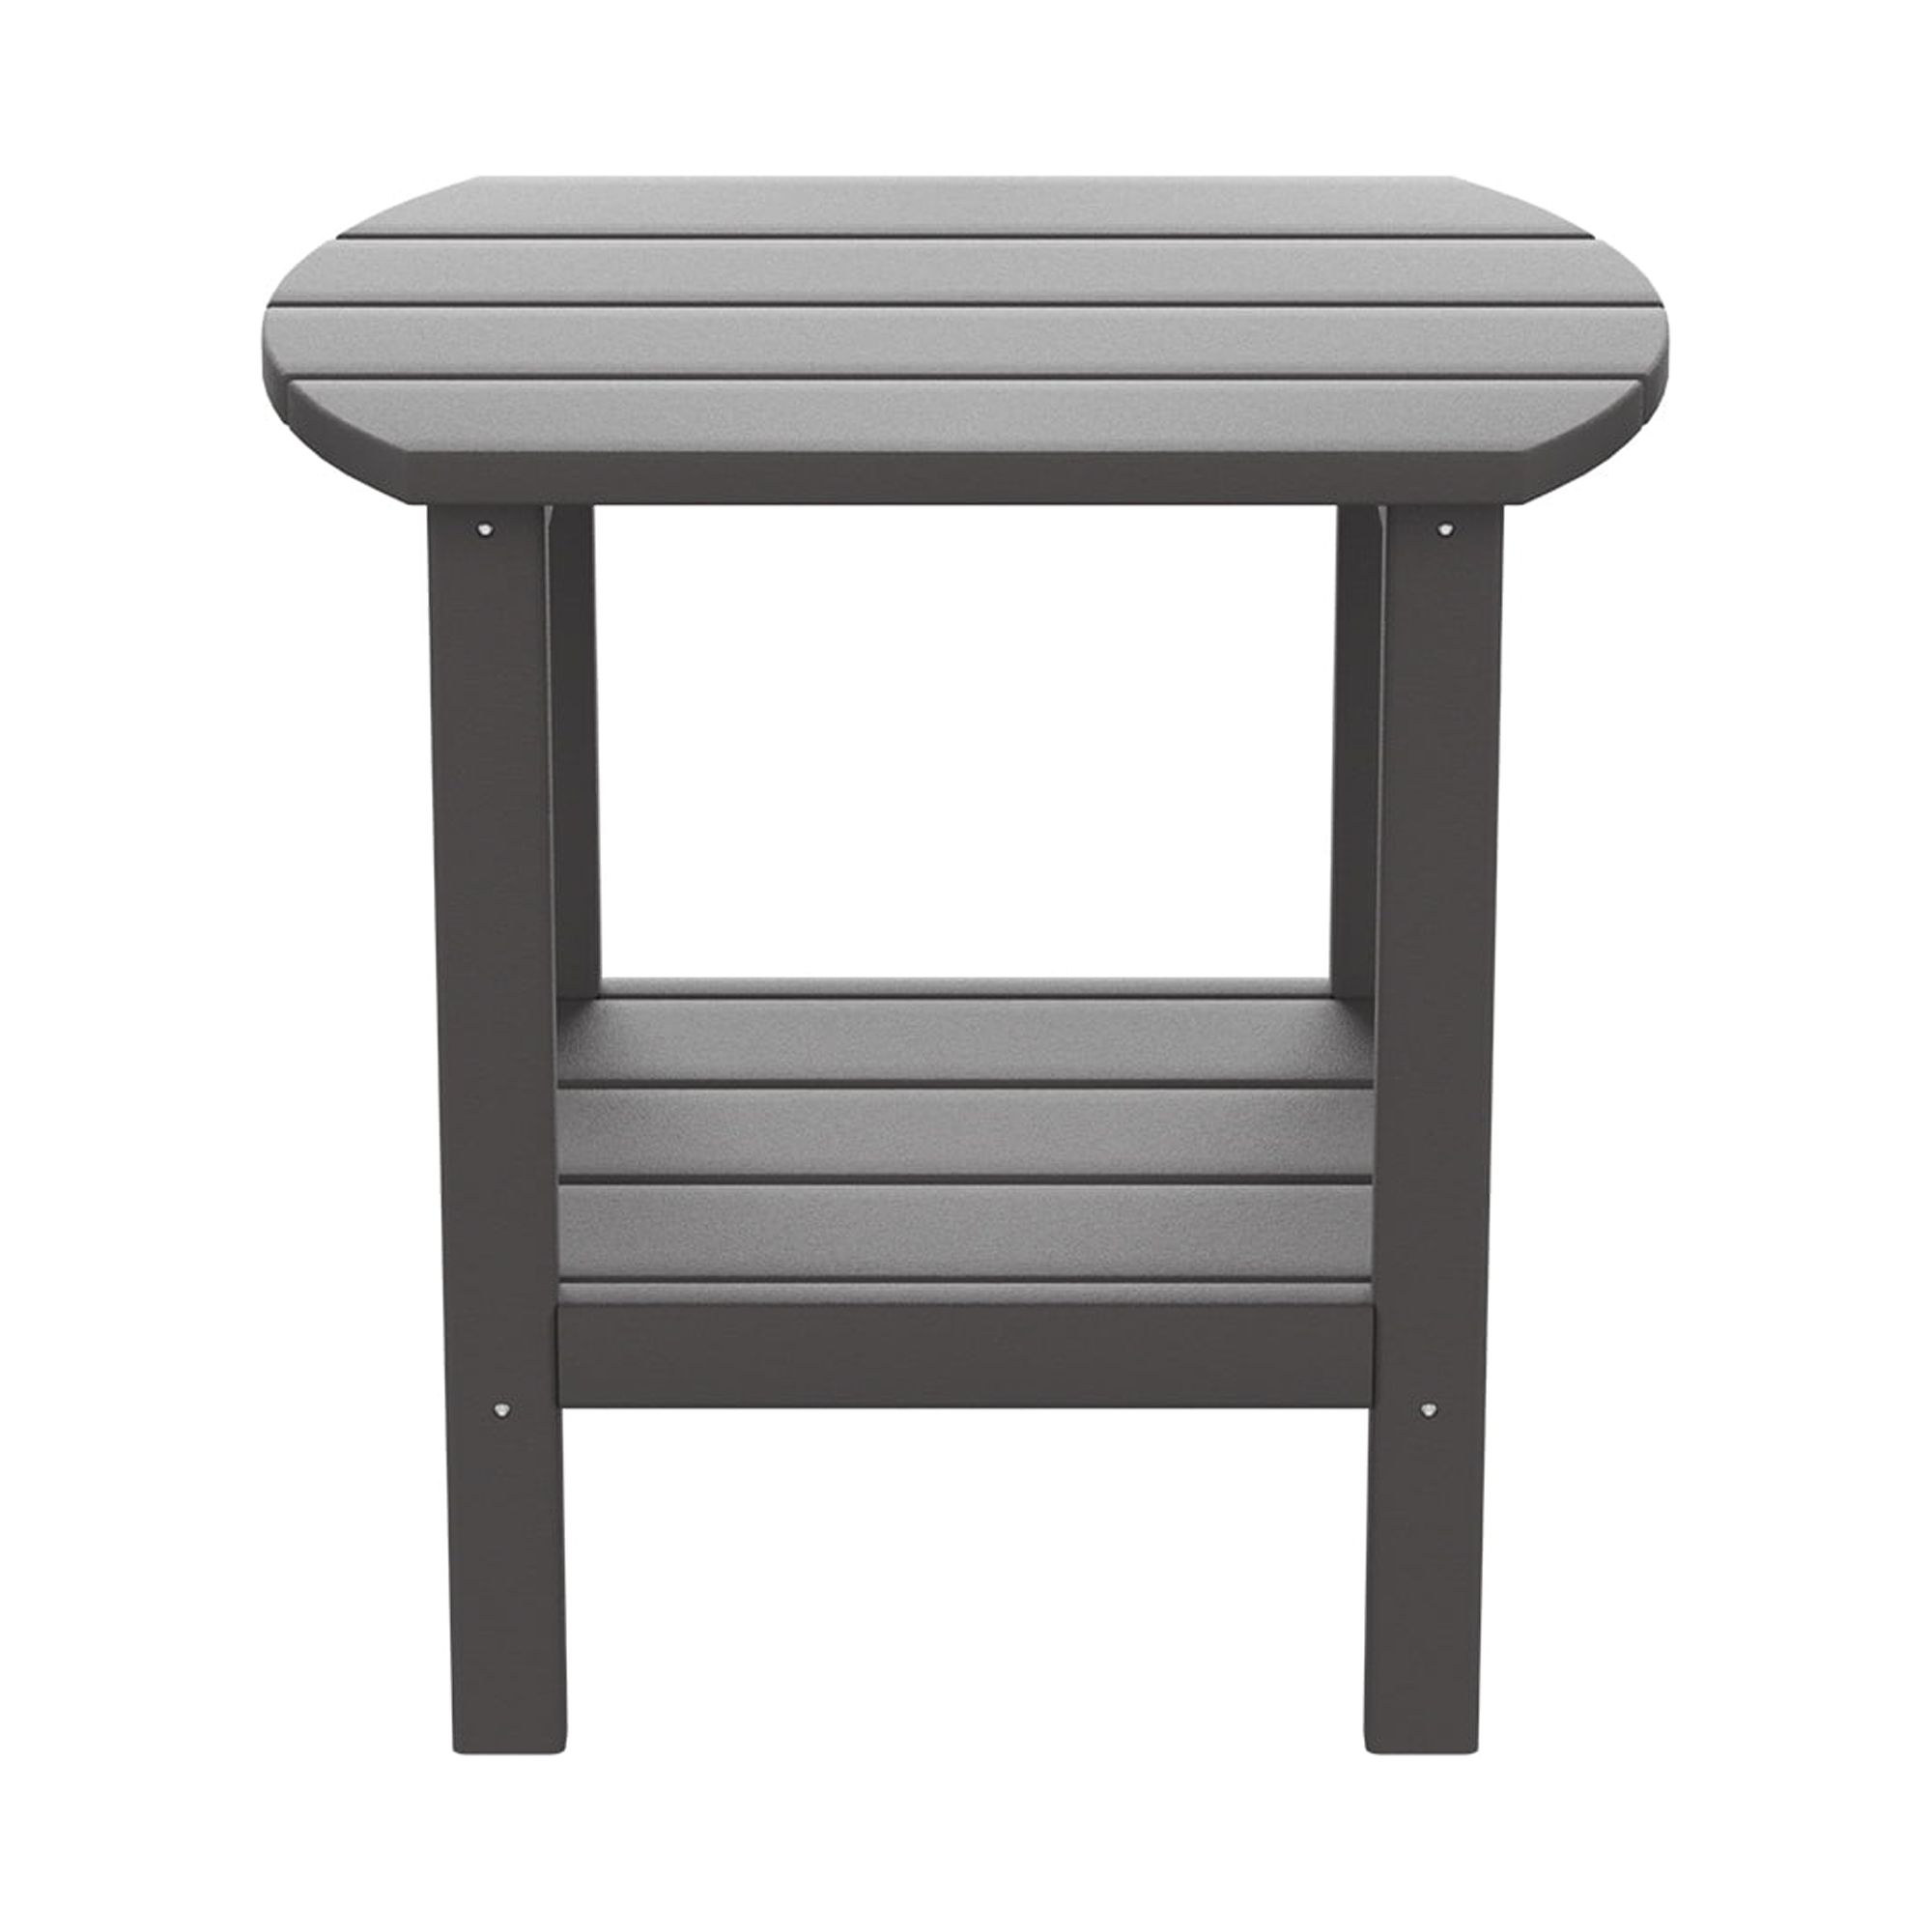 BesBuy 2022 Upgraded Outdoor Side Table with 2 Layer Storage, Plastic Waterproof and UV Resistant HDPE Coffee End Tables for Patio, Backyard, Pool, Indoor Use - image 2 of 6